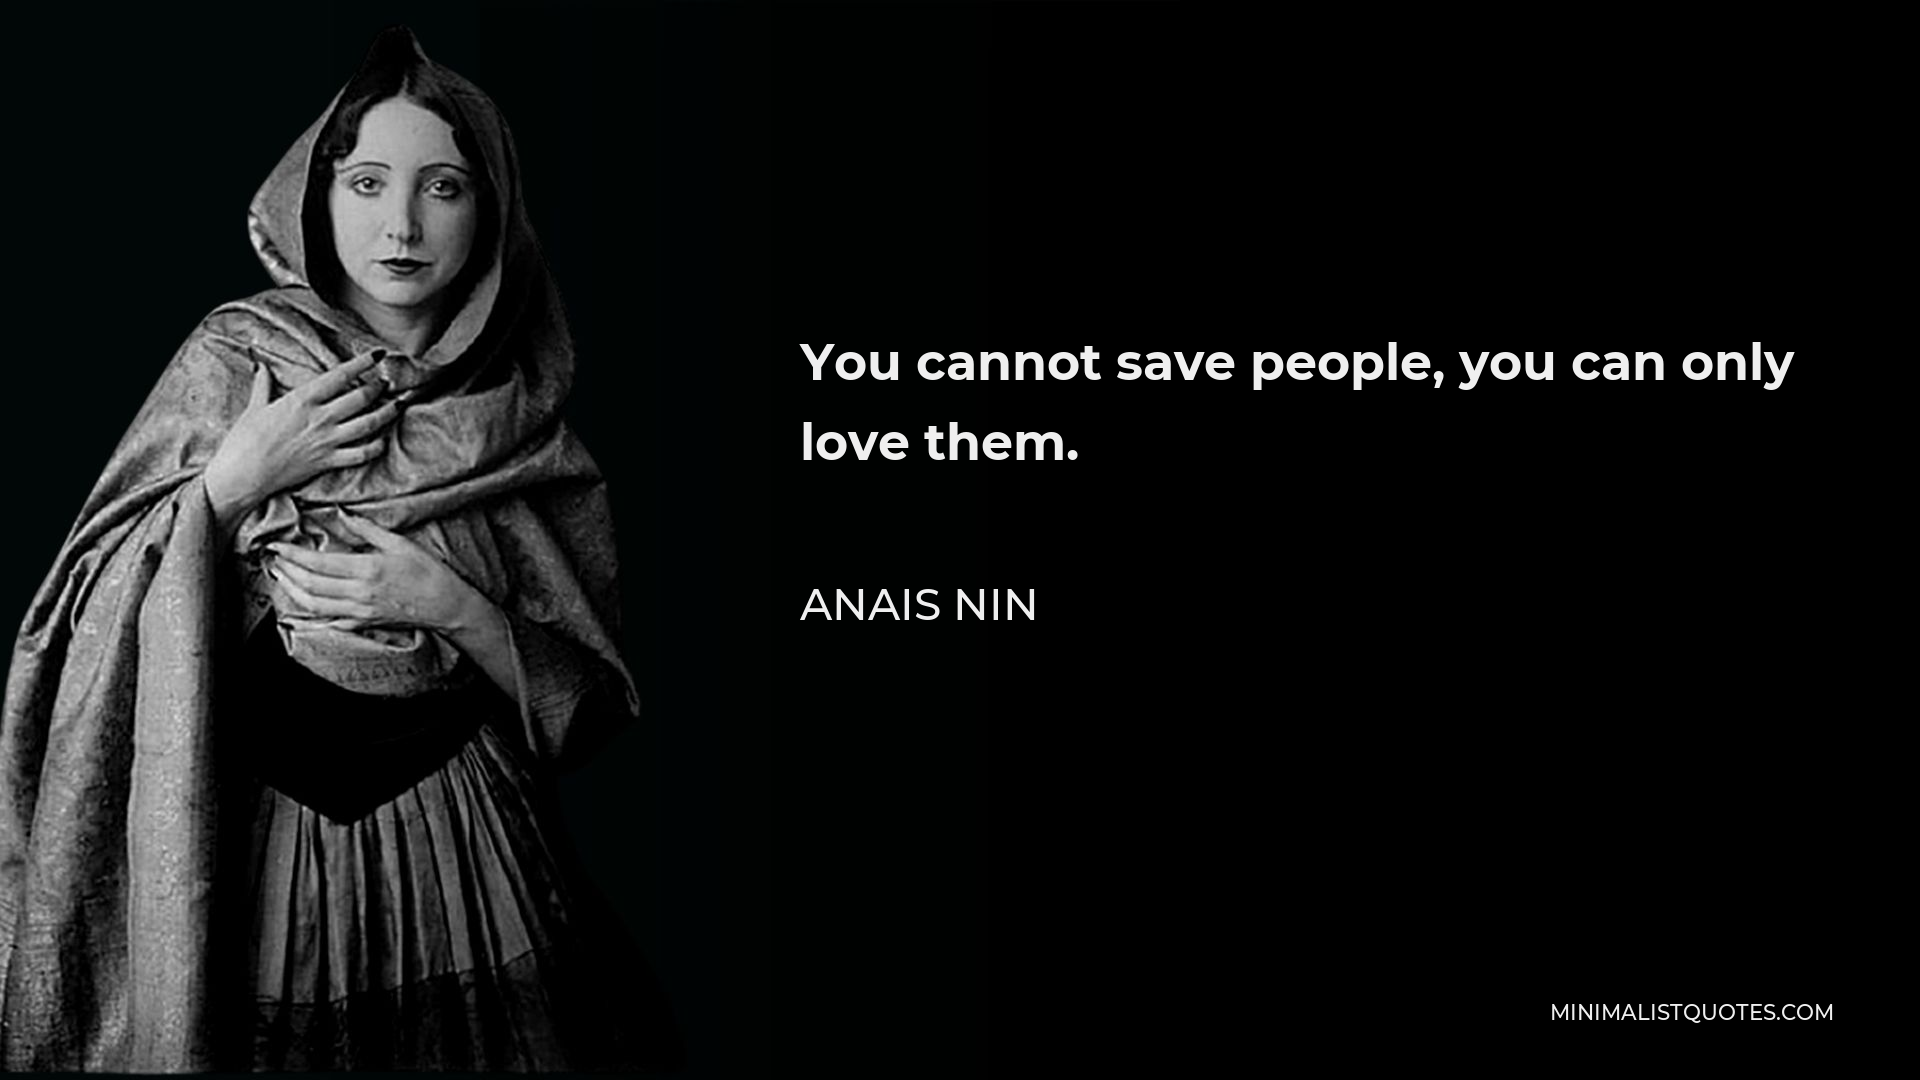 Anais Nin Quote - You cannot save people, you can only love them.